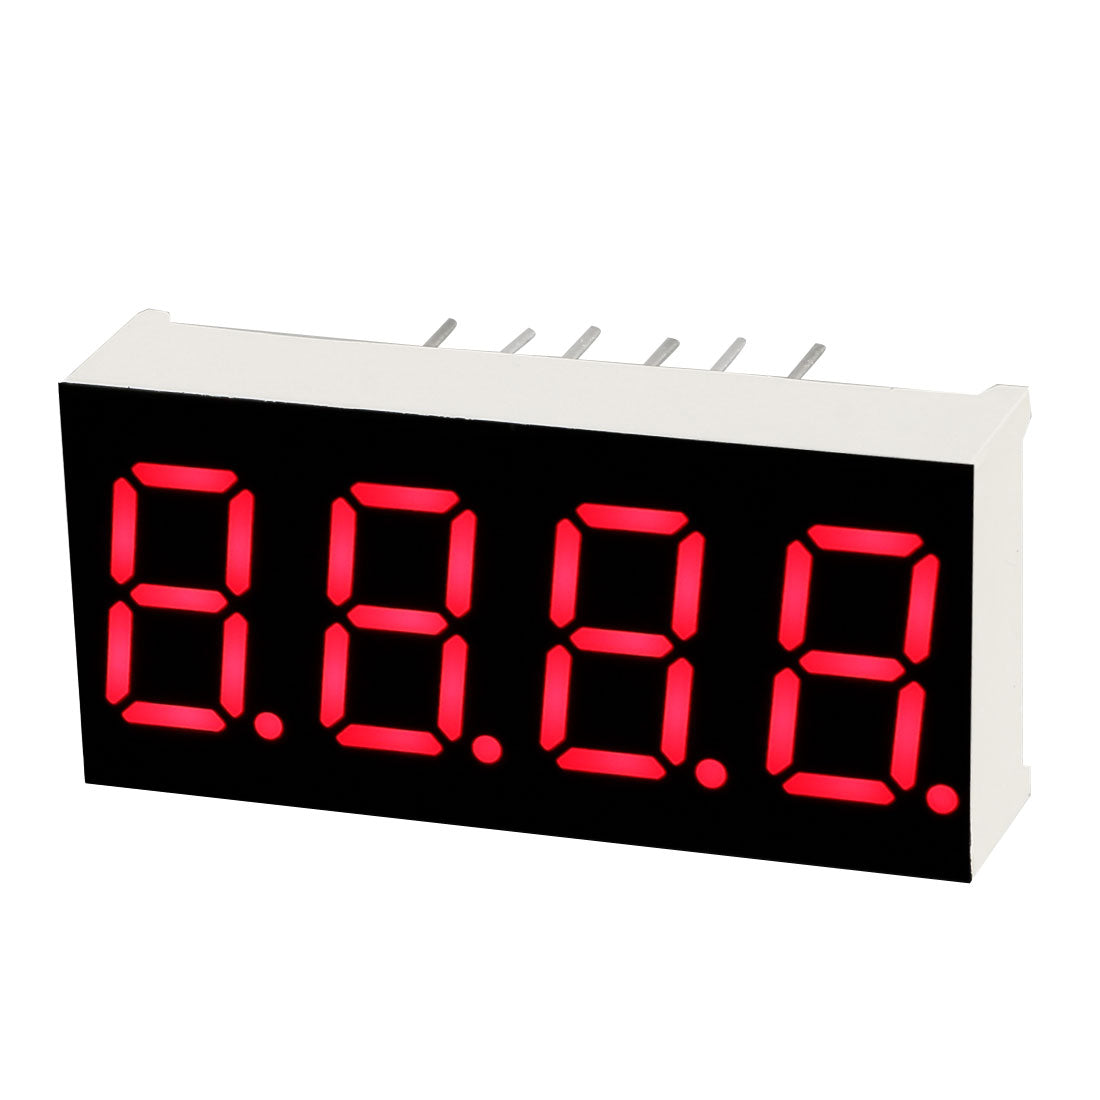 uxcell Uxcell Common Anode 12 Pin 4 Bit 7 Segment 1.18 x 0.55 x 0.28 Inch 0.35" Red LED Display Digital Tube 3pcs